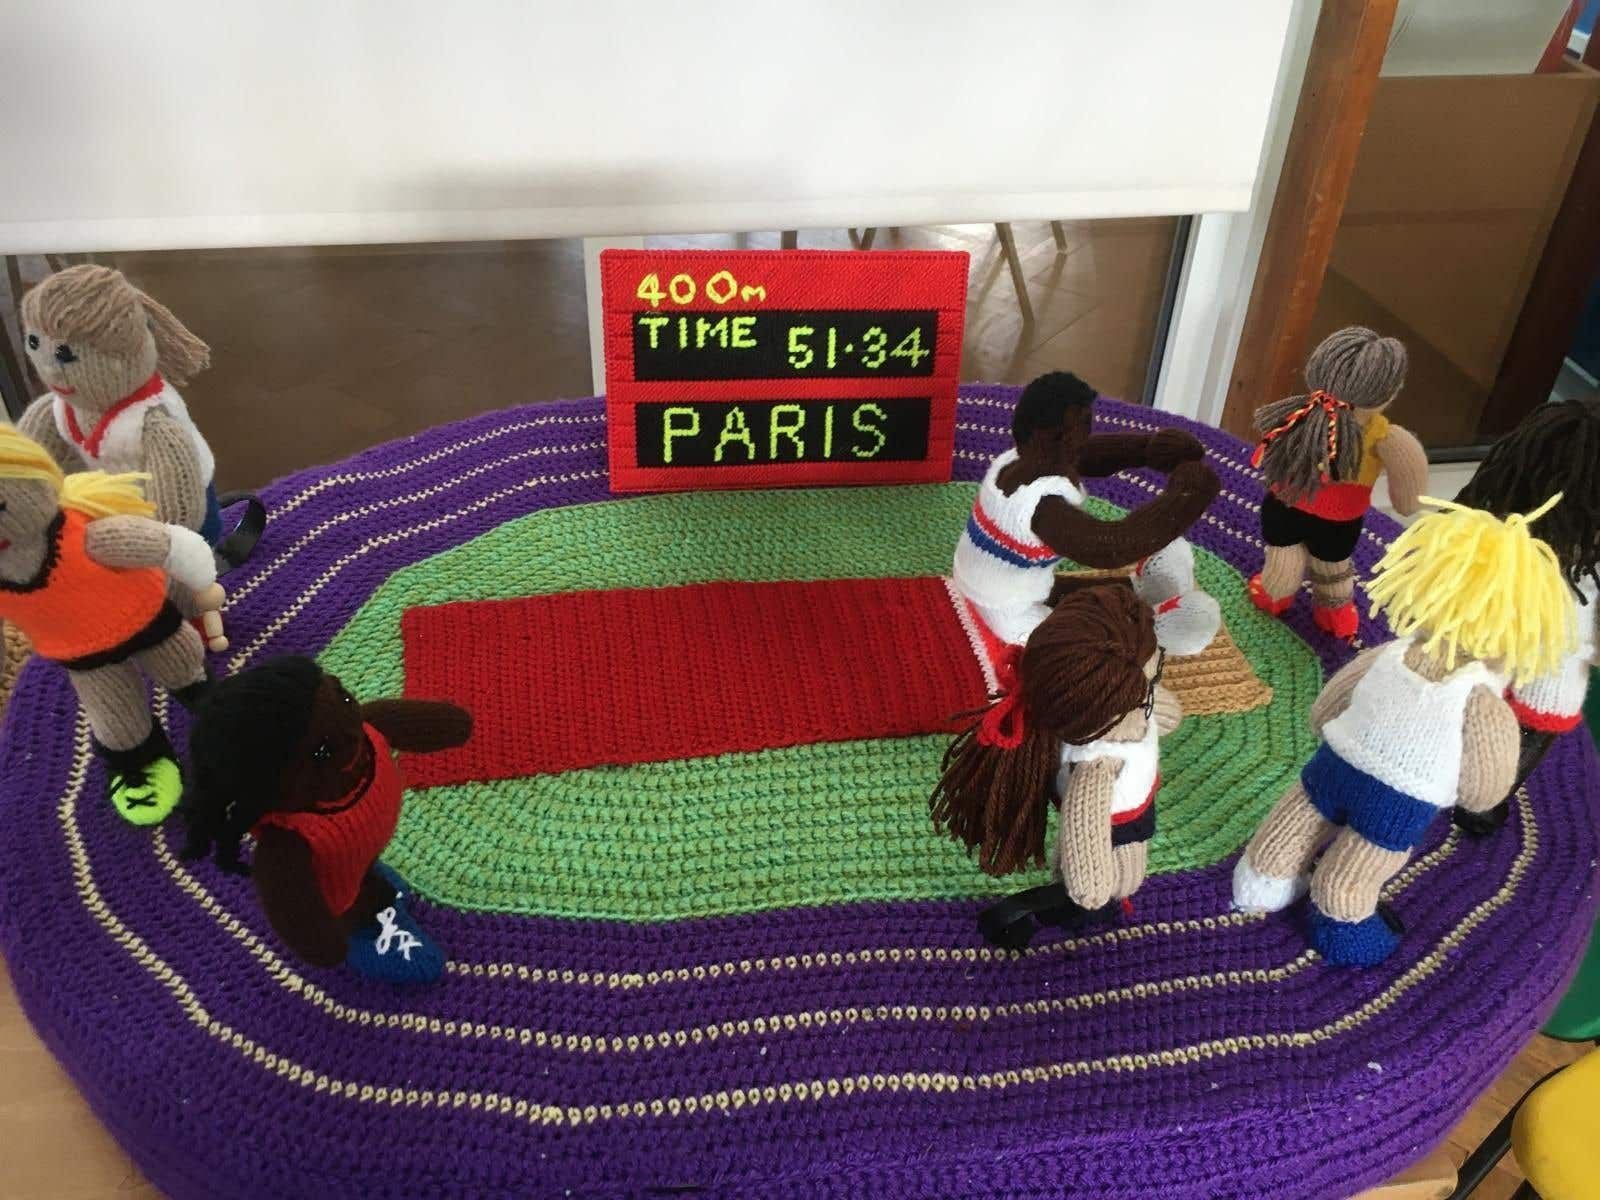 Crafting group creates unique homage to Olympics dubbed ‘Yarnlympics’